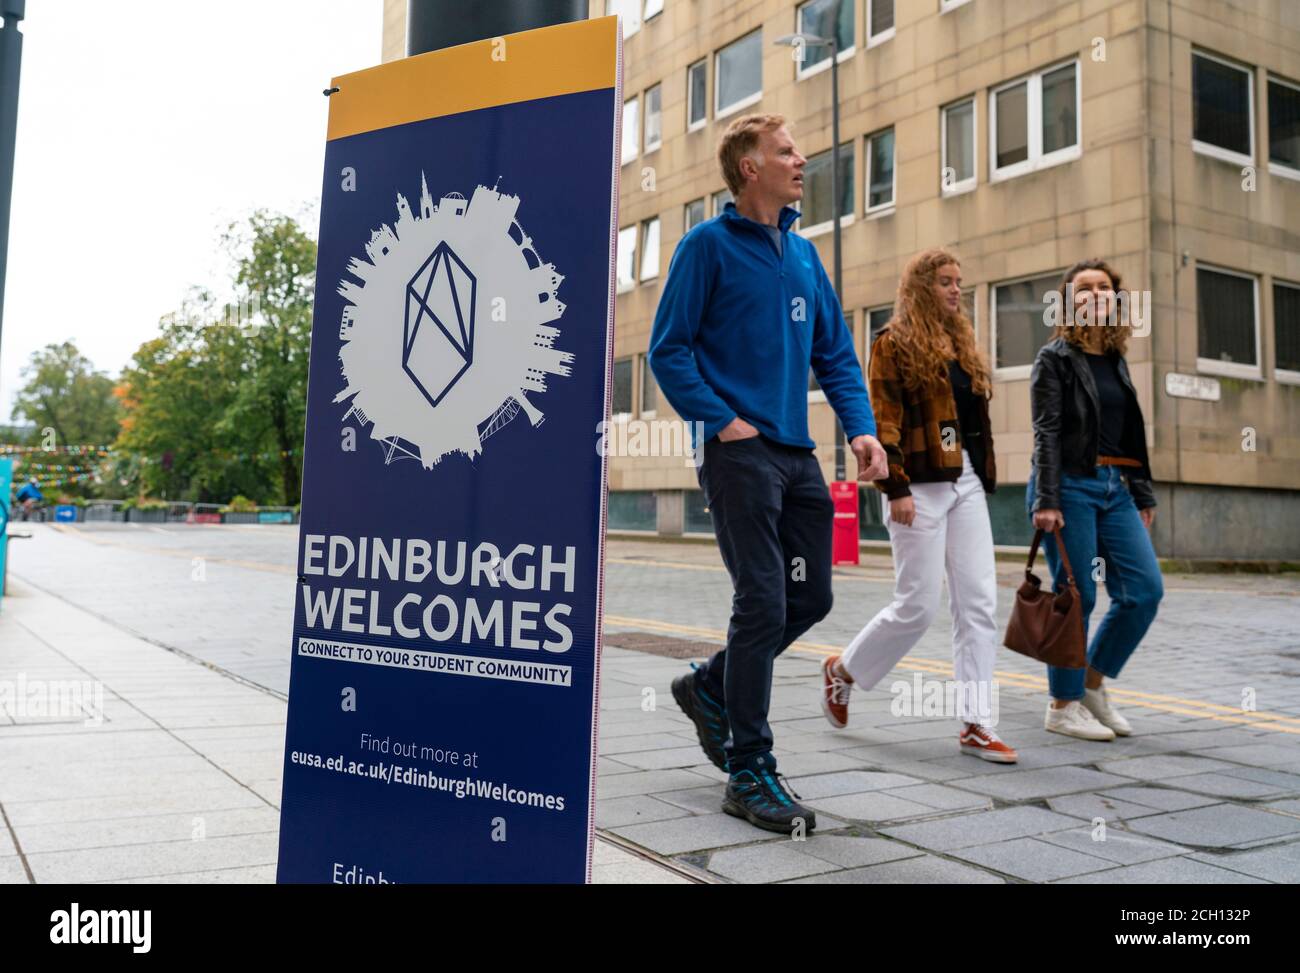 Edinburgh, Scotland, UK. 13 September, 2020. Preparations for start of term  at Edinburgh University. FreshersÕ Week starts Monday 14 September and work  is being carried out on campus to allow students to